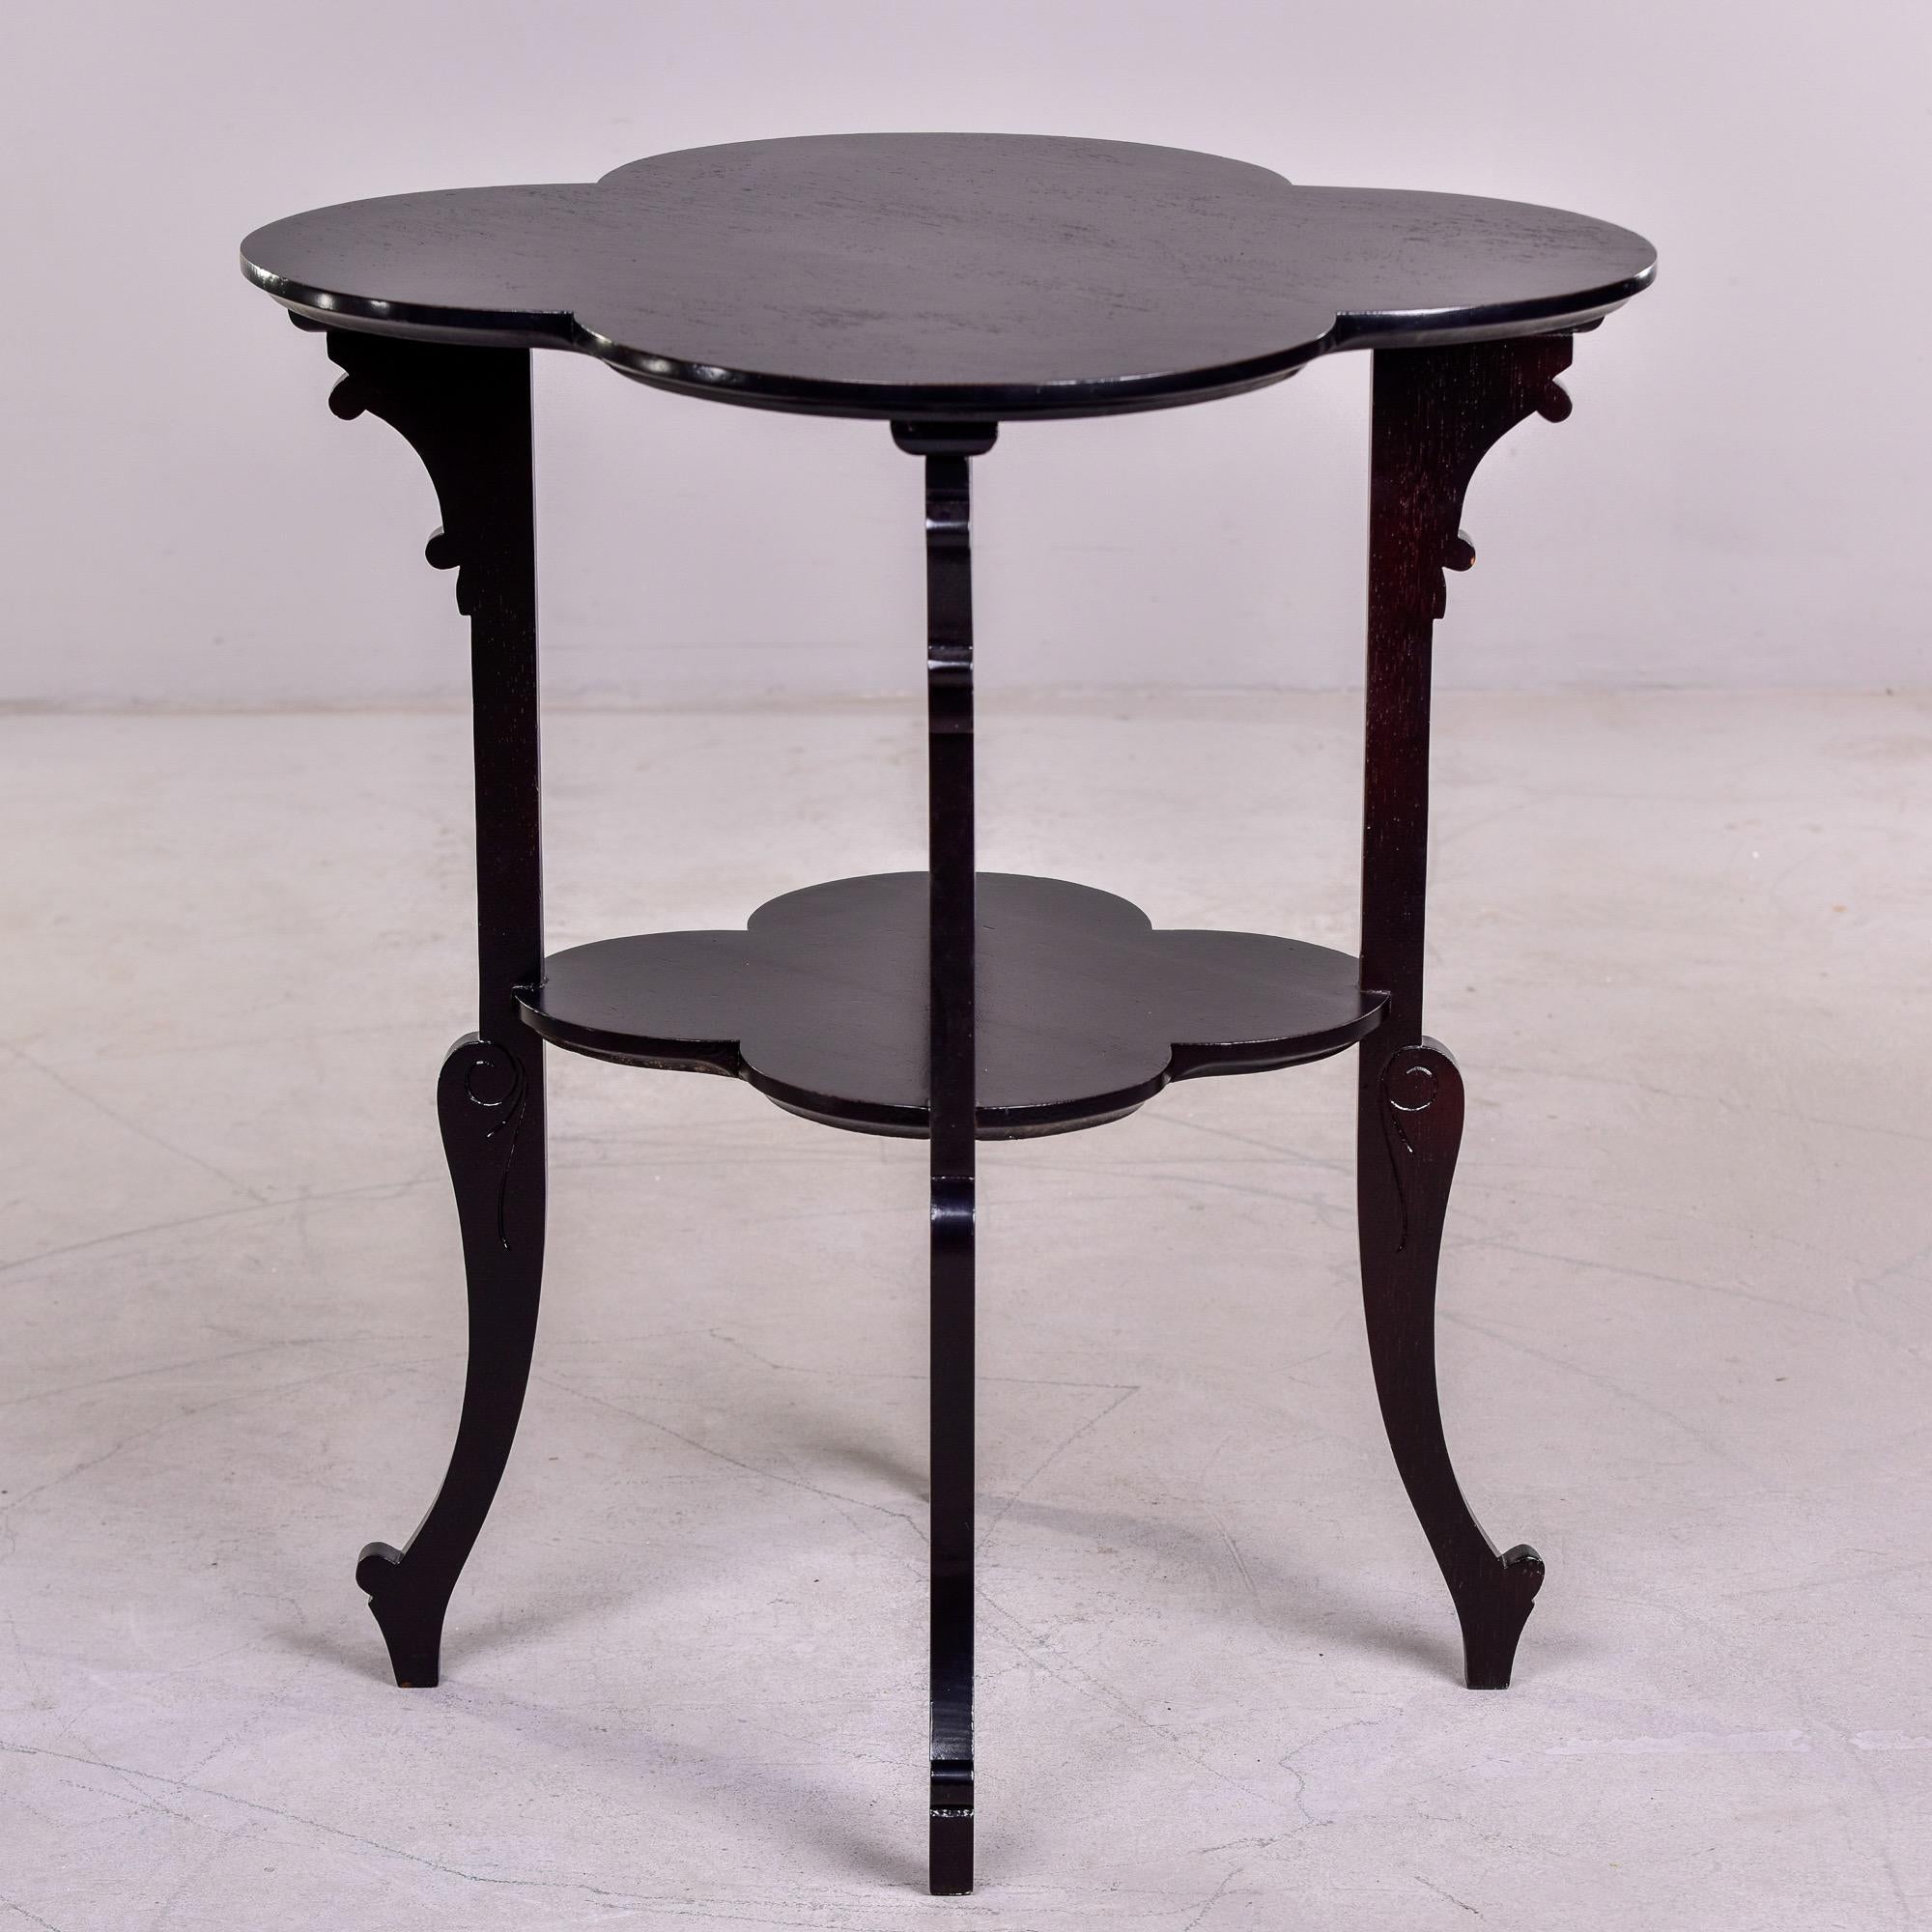 French Art Deco Black Scalloped Quatrefoil Side Table In Good Condition For Sale In Troy, MI